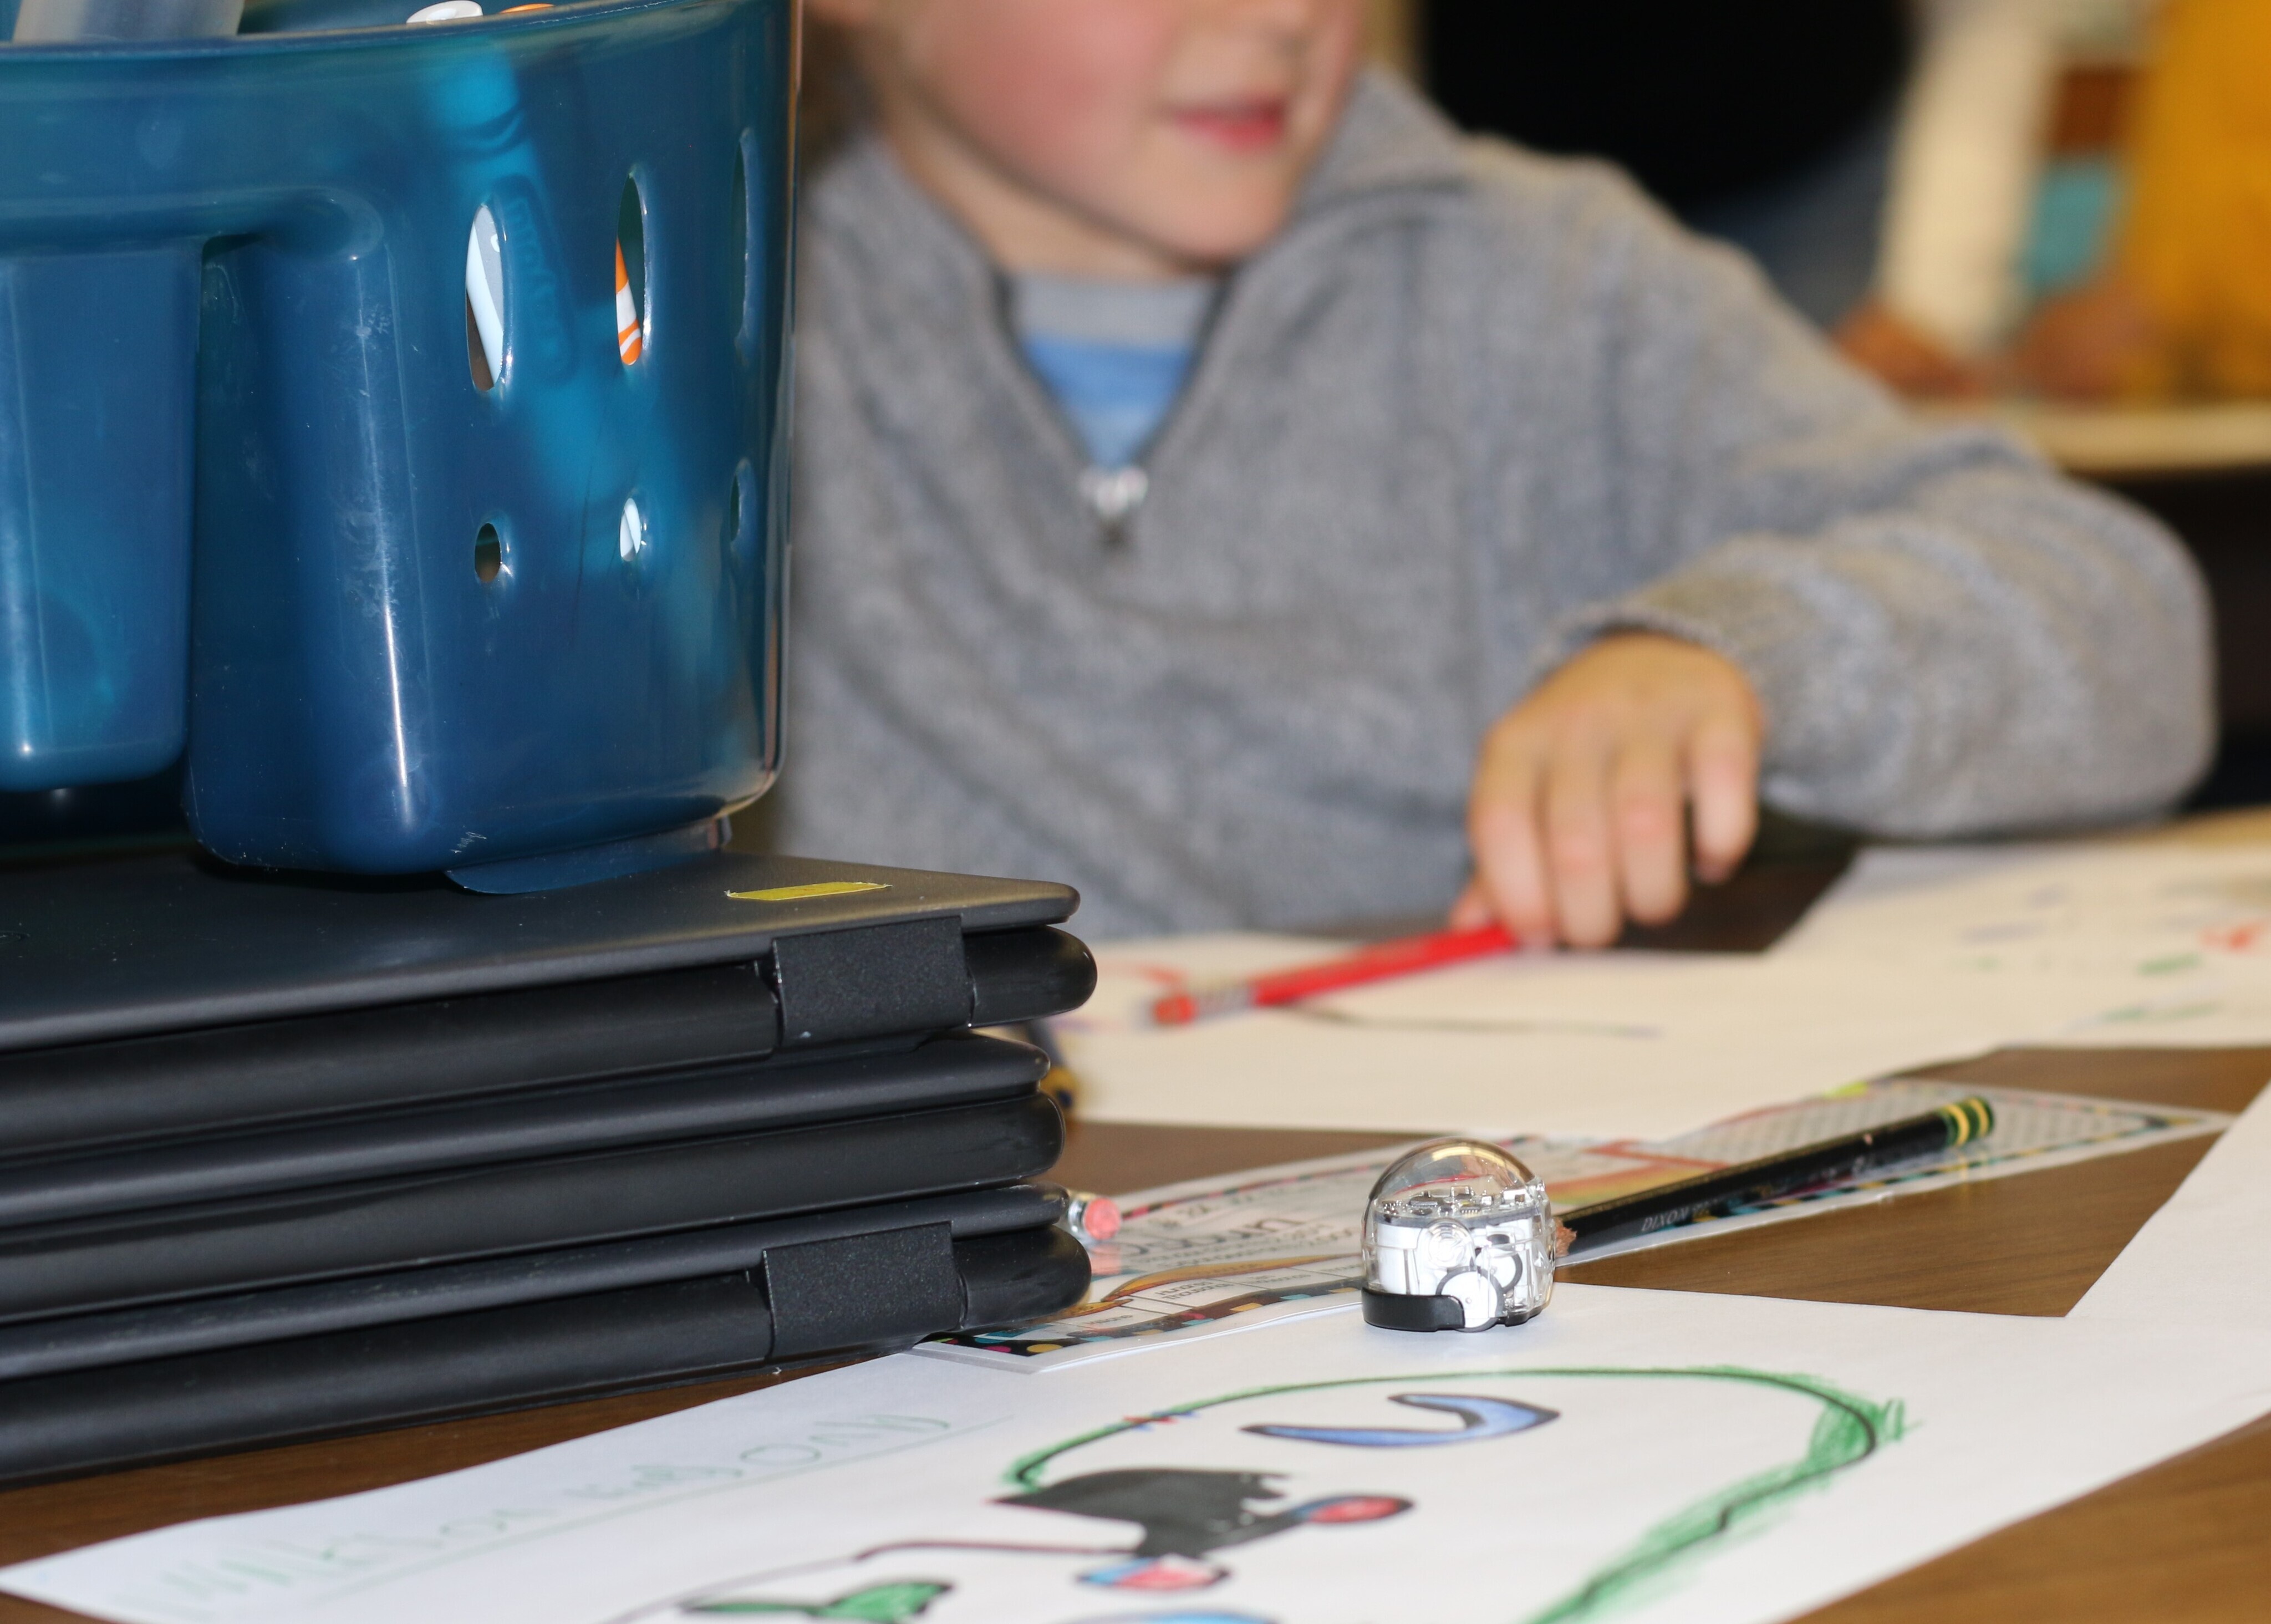 An Ozobot ready to roll during the Shawmut Hills robot party